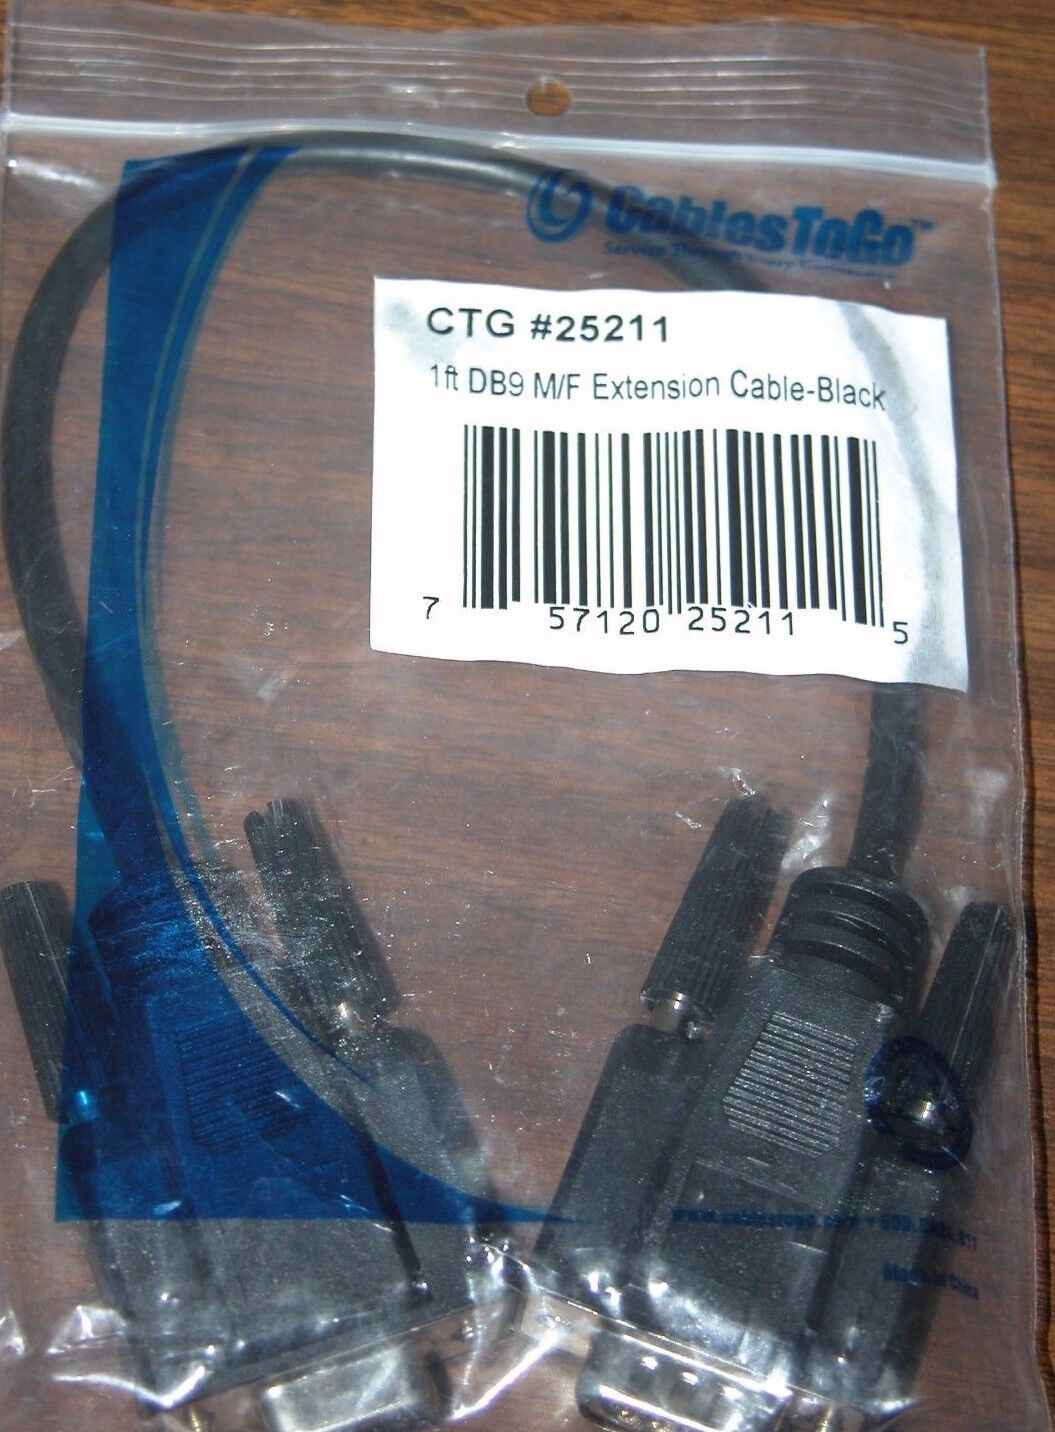 New CablesToGo 25211 DB9 M/F Extension Cable 1ft Serial RS232 - Ships from USA